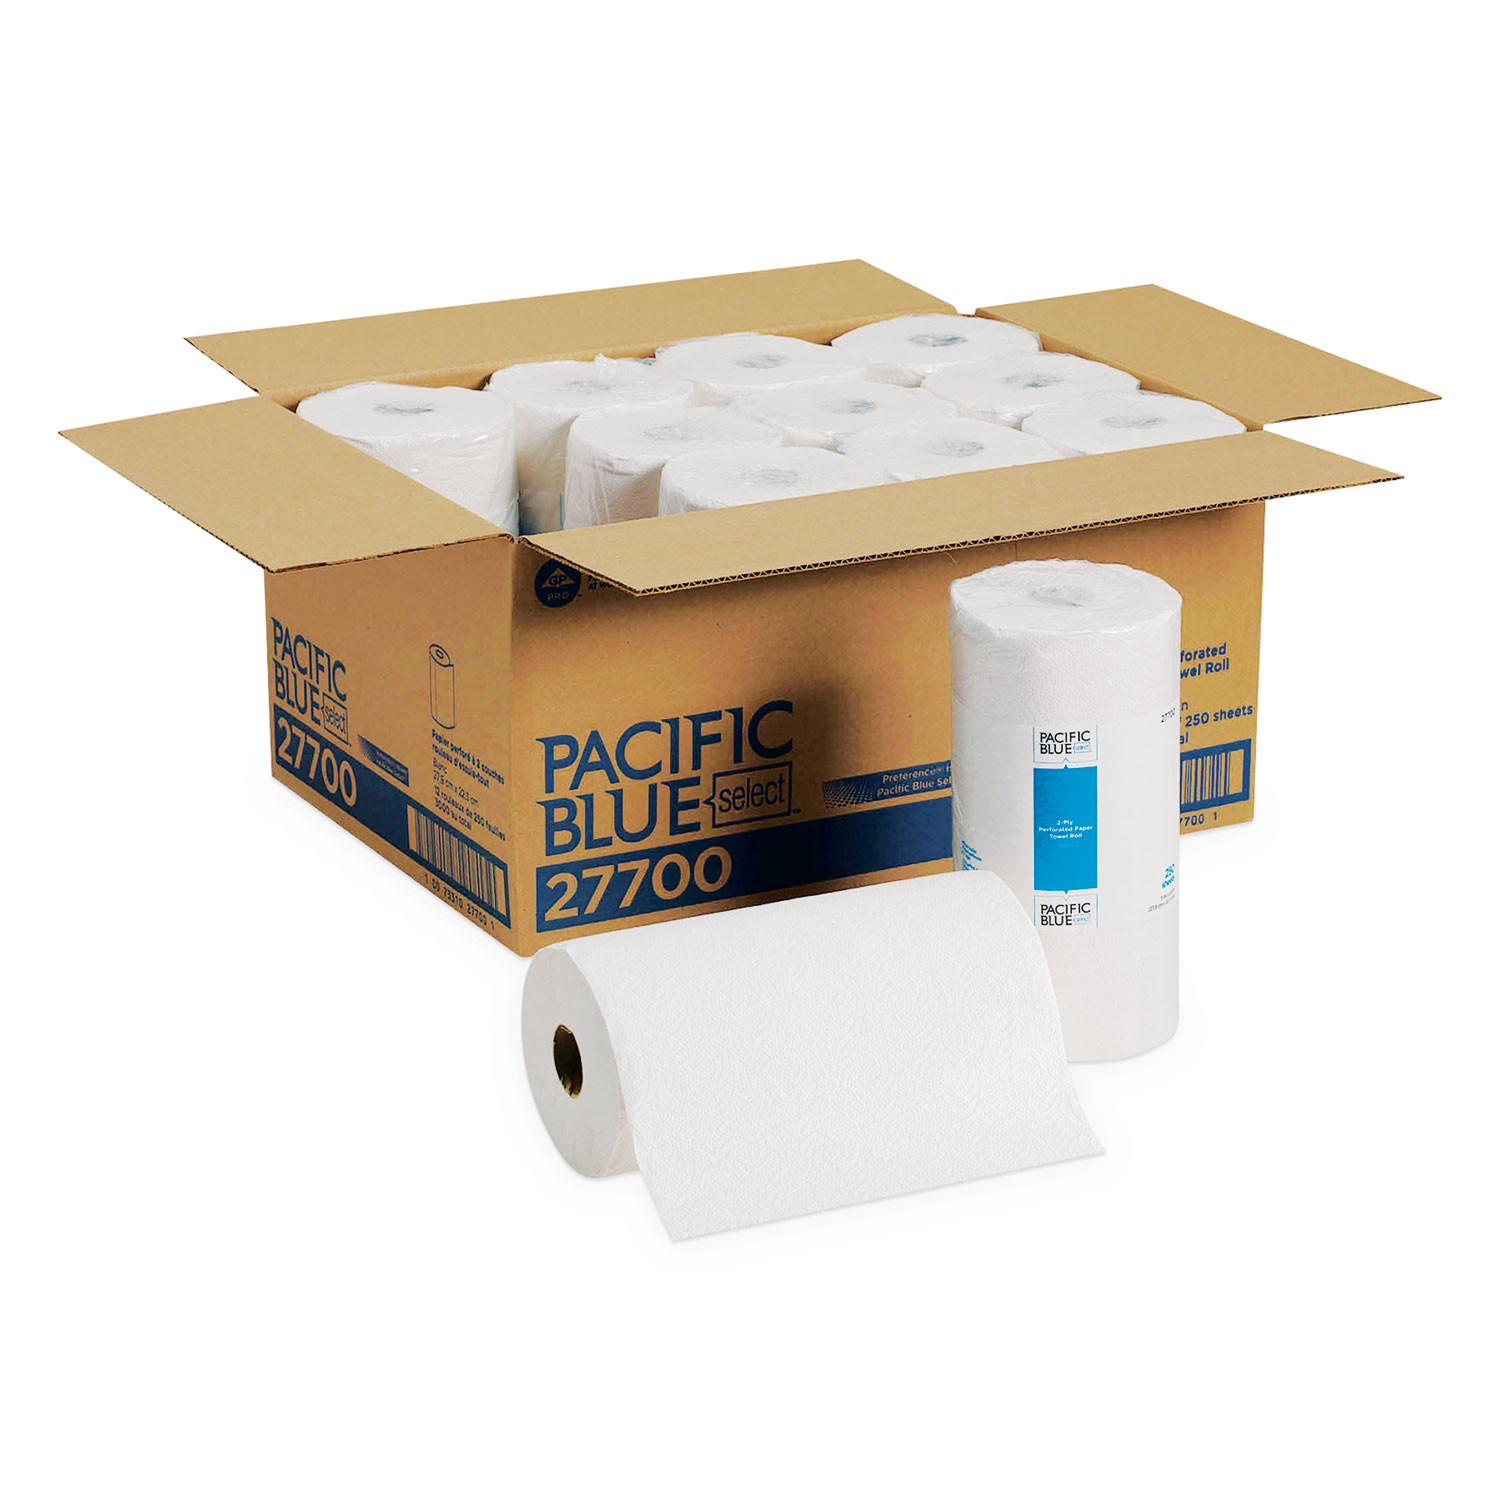  Georgia Pacific Professional 27700 Pacific Blue Select Perforated Paper Towel, 8 4/5x11, White, 250/Roll, 12 RL/CT (GPC27700) 